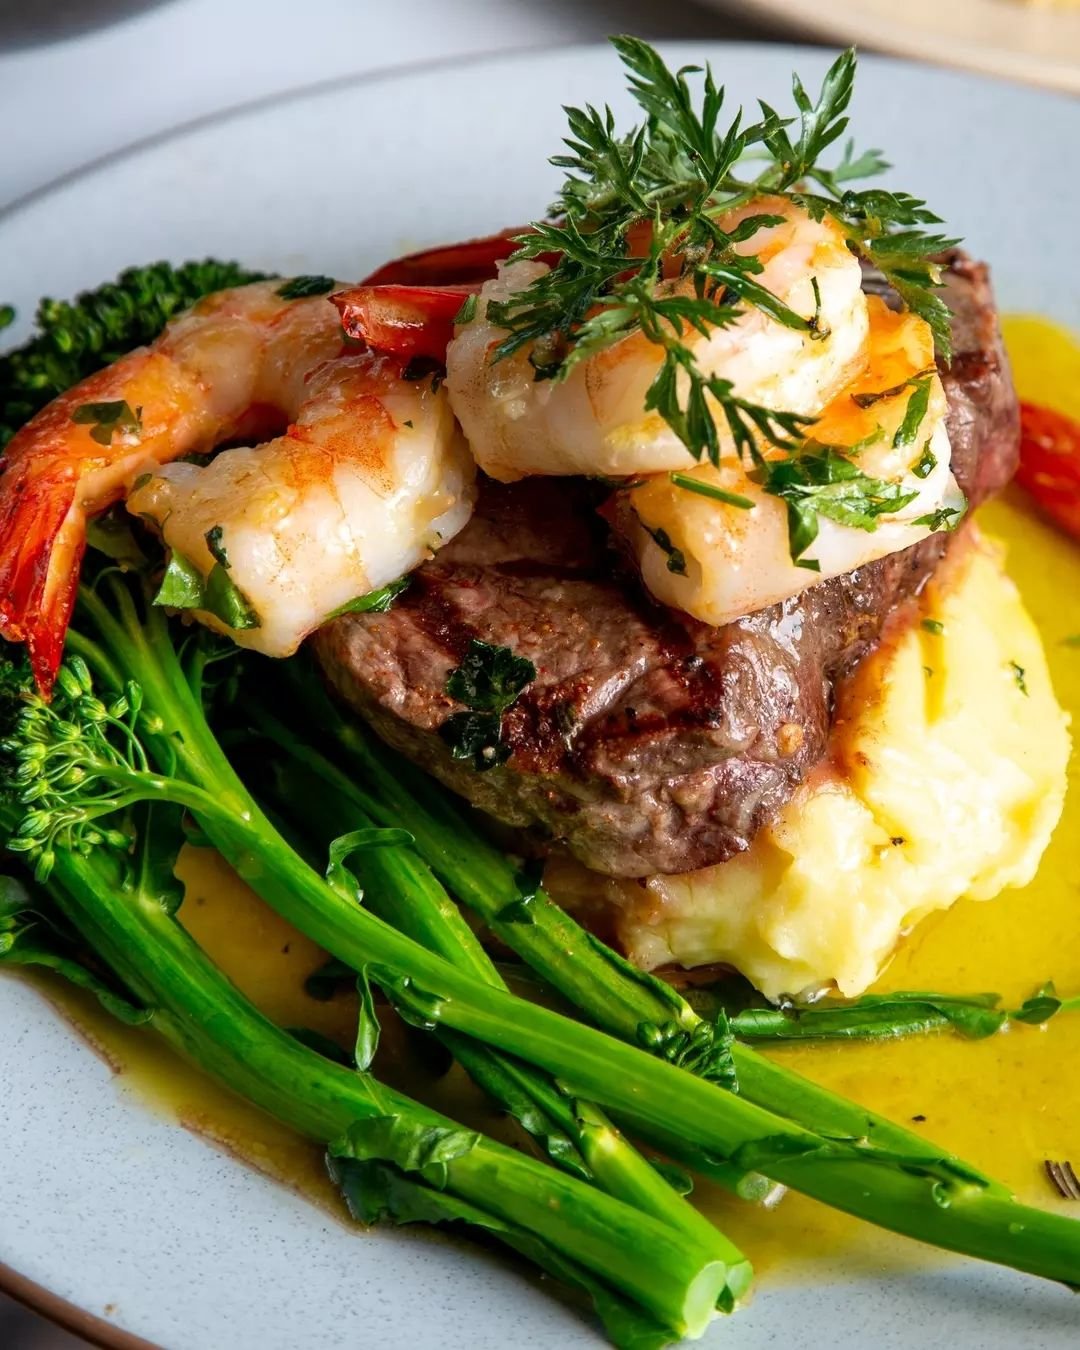 When was your last Bistro feast? We think it's time... book a table and enjoy.&nbsp;

🥩 250g grass fed scotch fillet, served with&nbsp;garlic mash, broccolini &amp; rosemary compound butter, with a&nbsp;king prawn topper.&nbsp;🦐&nbsp;De-lish! 🤤
.
